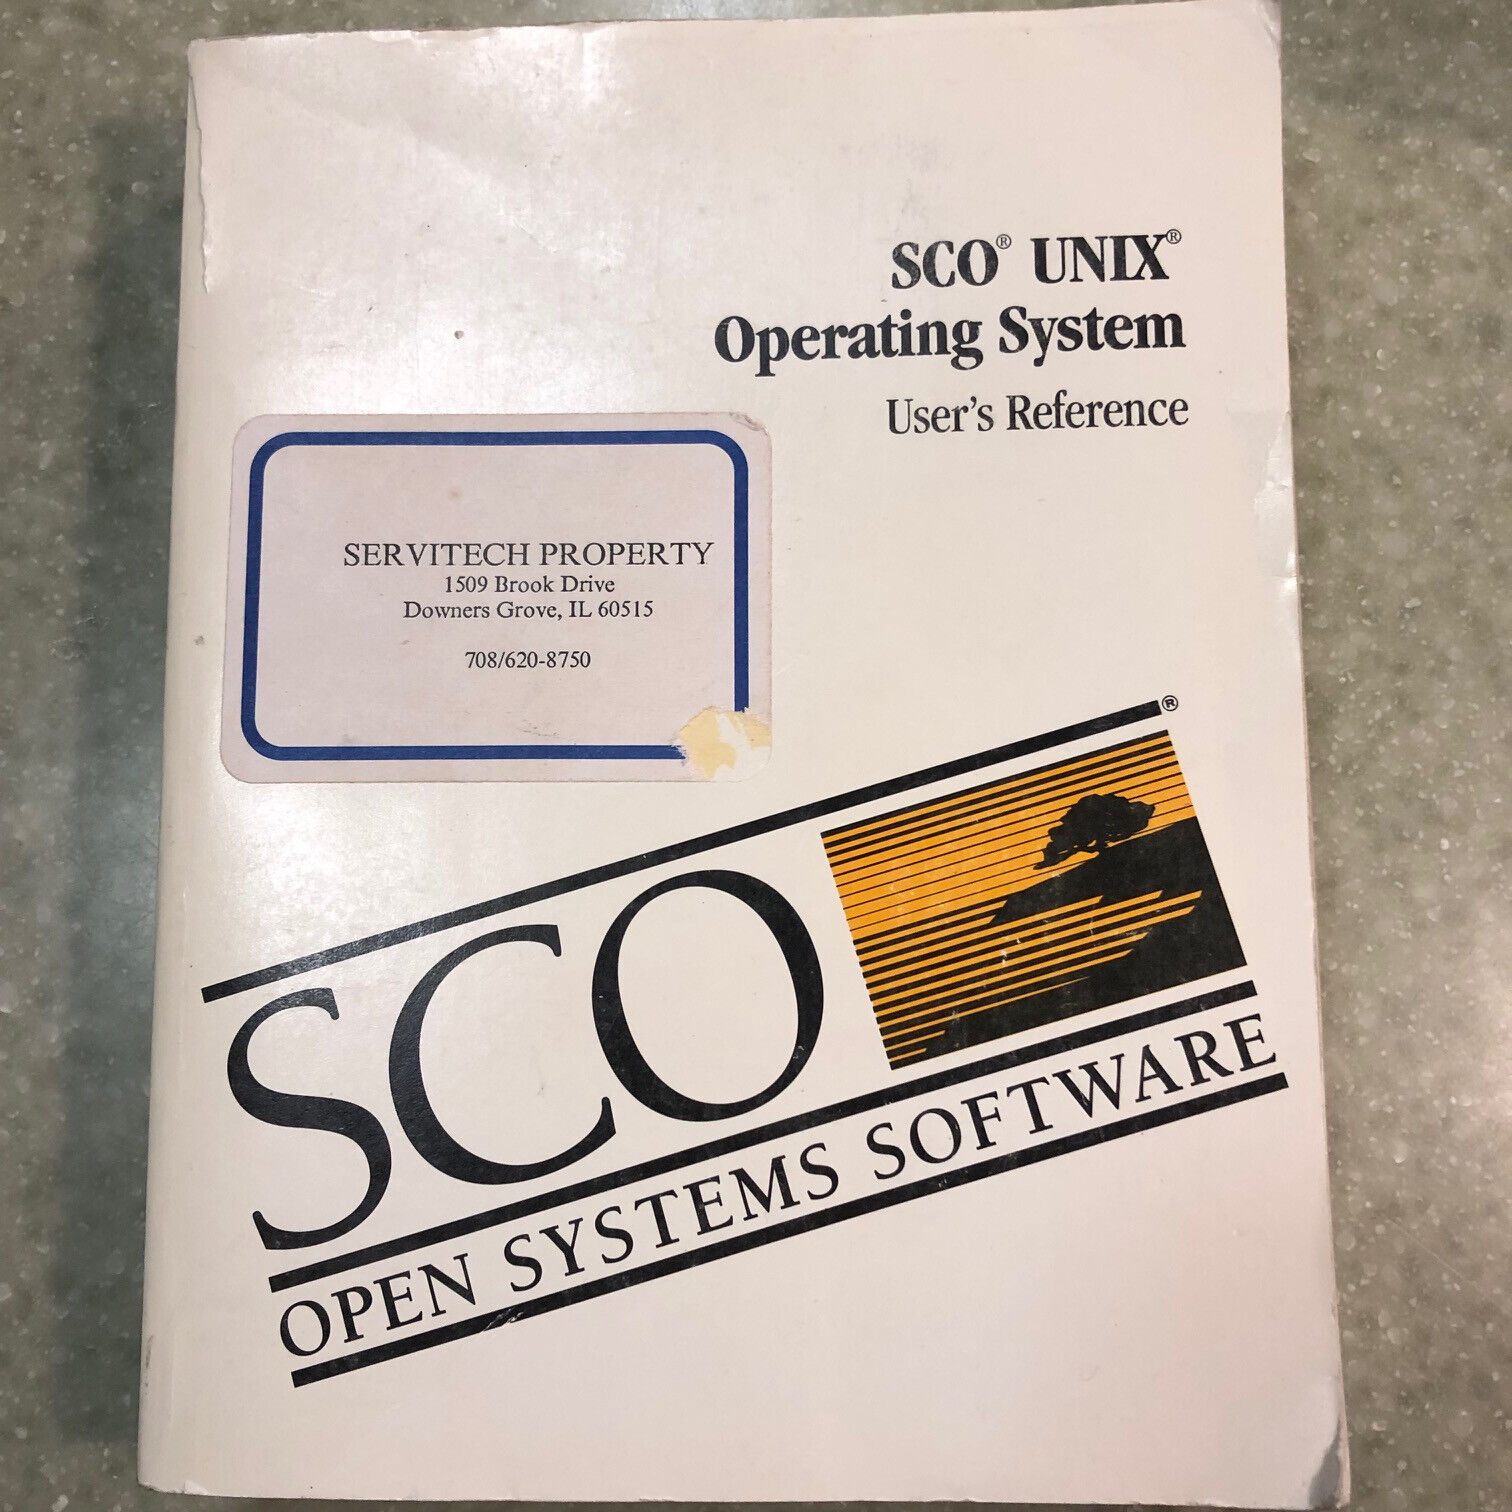 SCO Open Systems Software,SCO Unic Operating System User's Refenence Manual